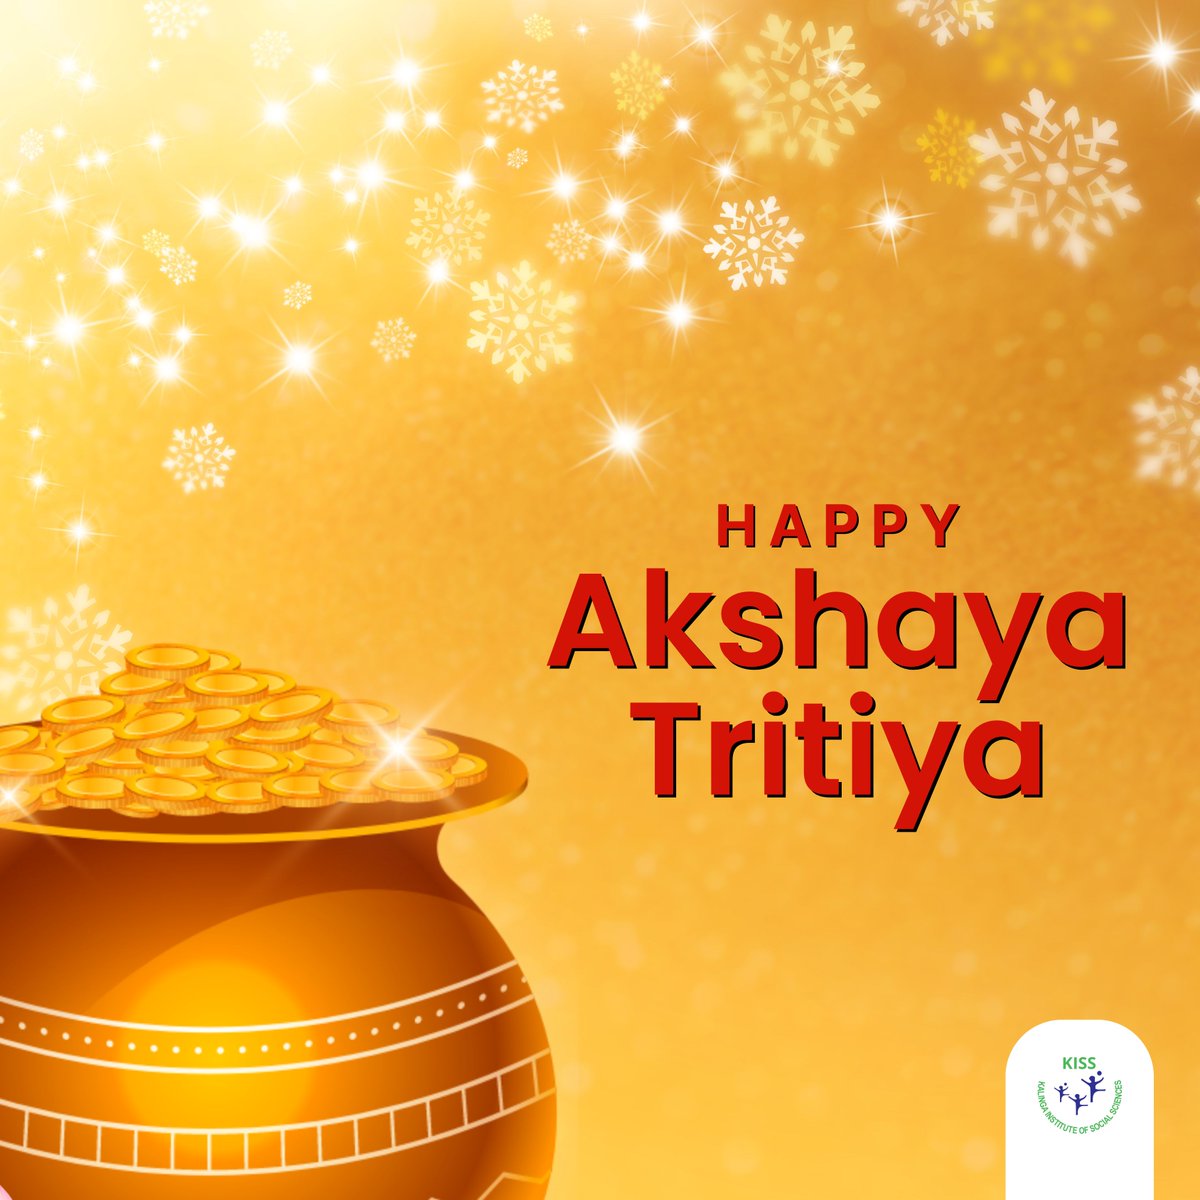 Sending warm wishes for a joyous and prosperous Akshaya Tritiya from everyone here at #KISS! May this auspicious occasion fill your life with abundant happiness, success, and prosperity.